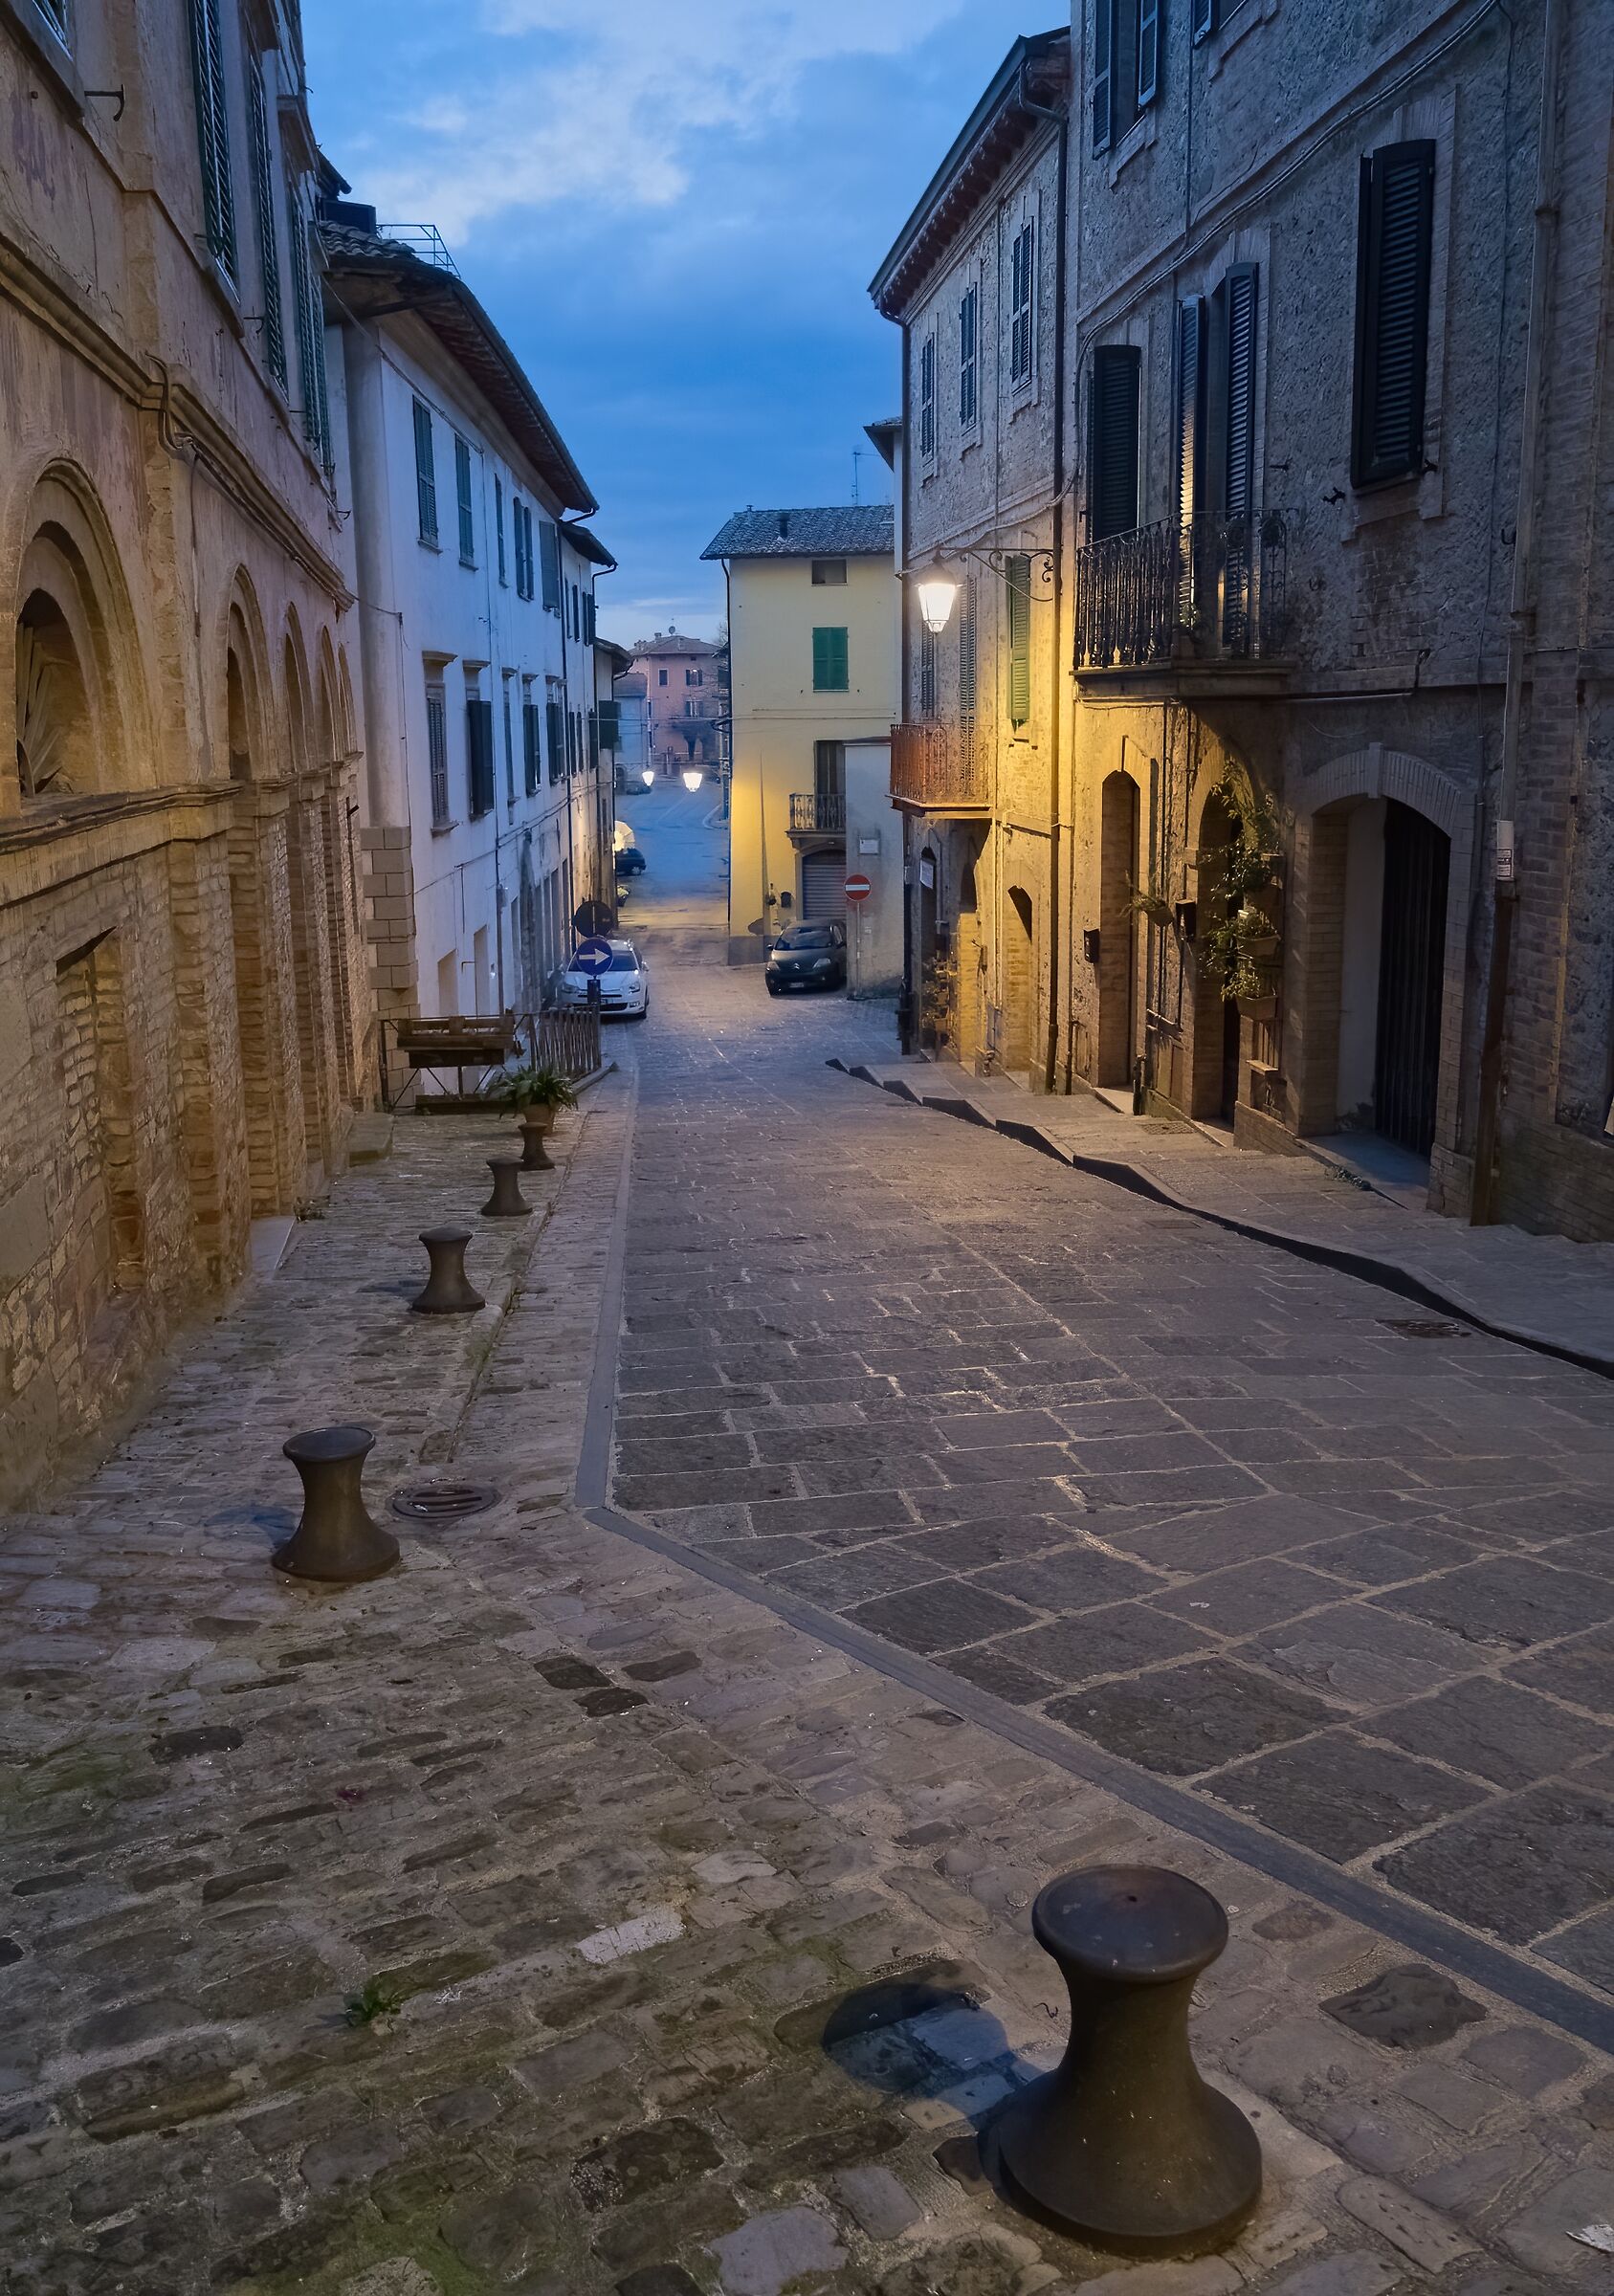 The alleys of Umbertide at sunset...